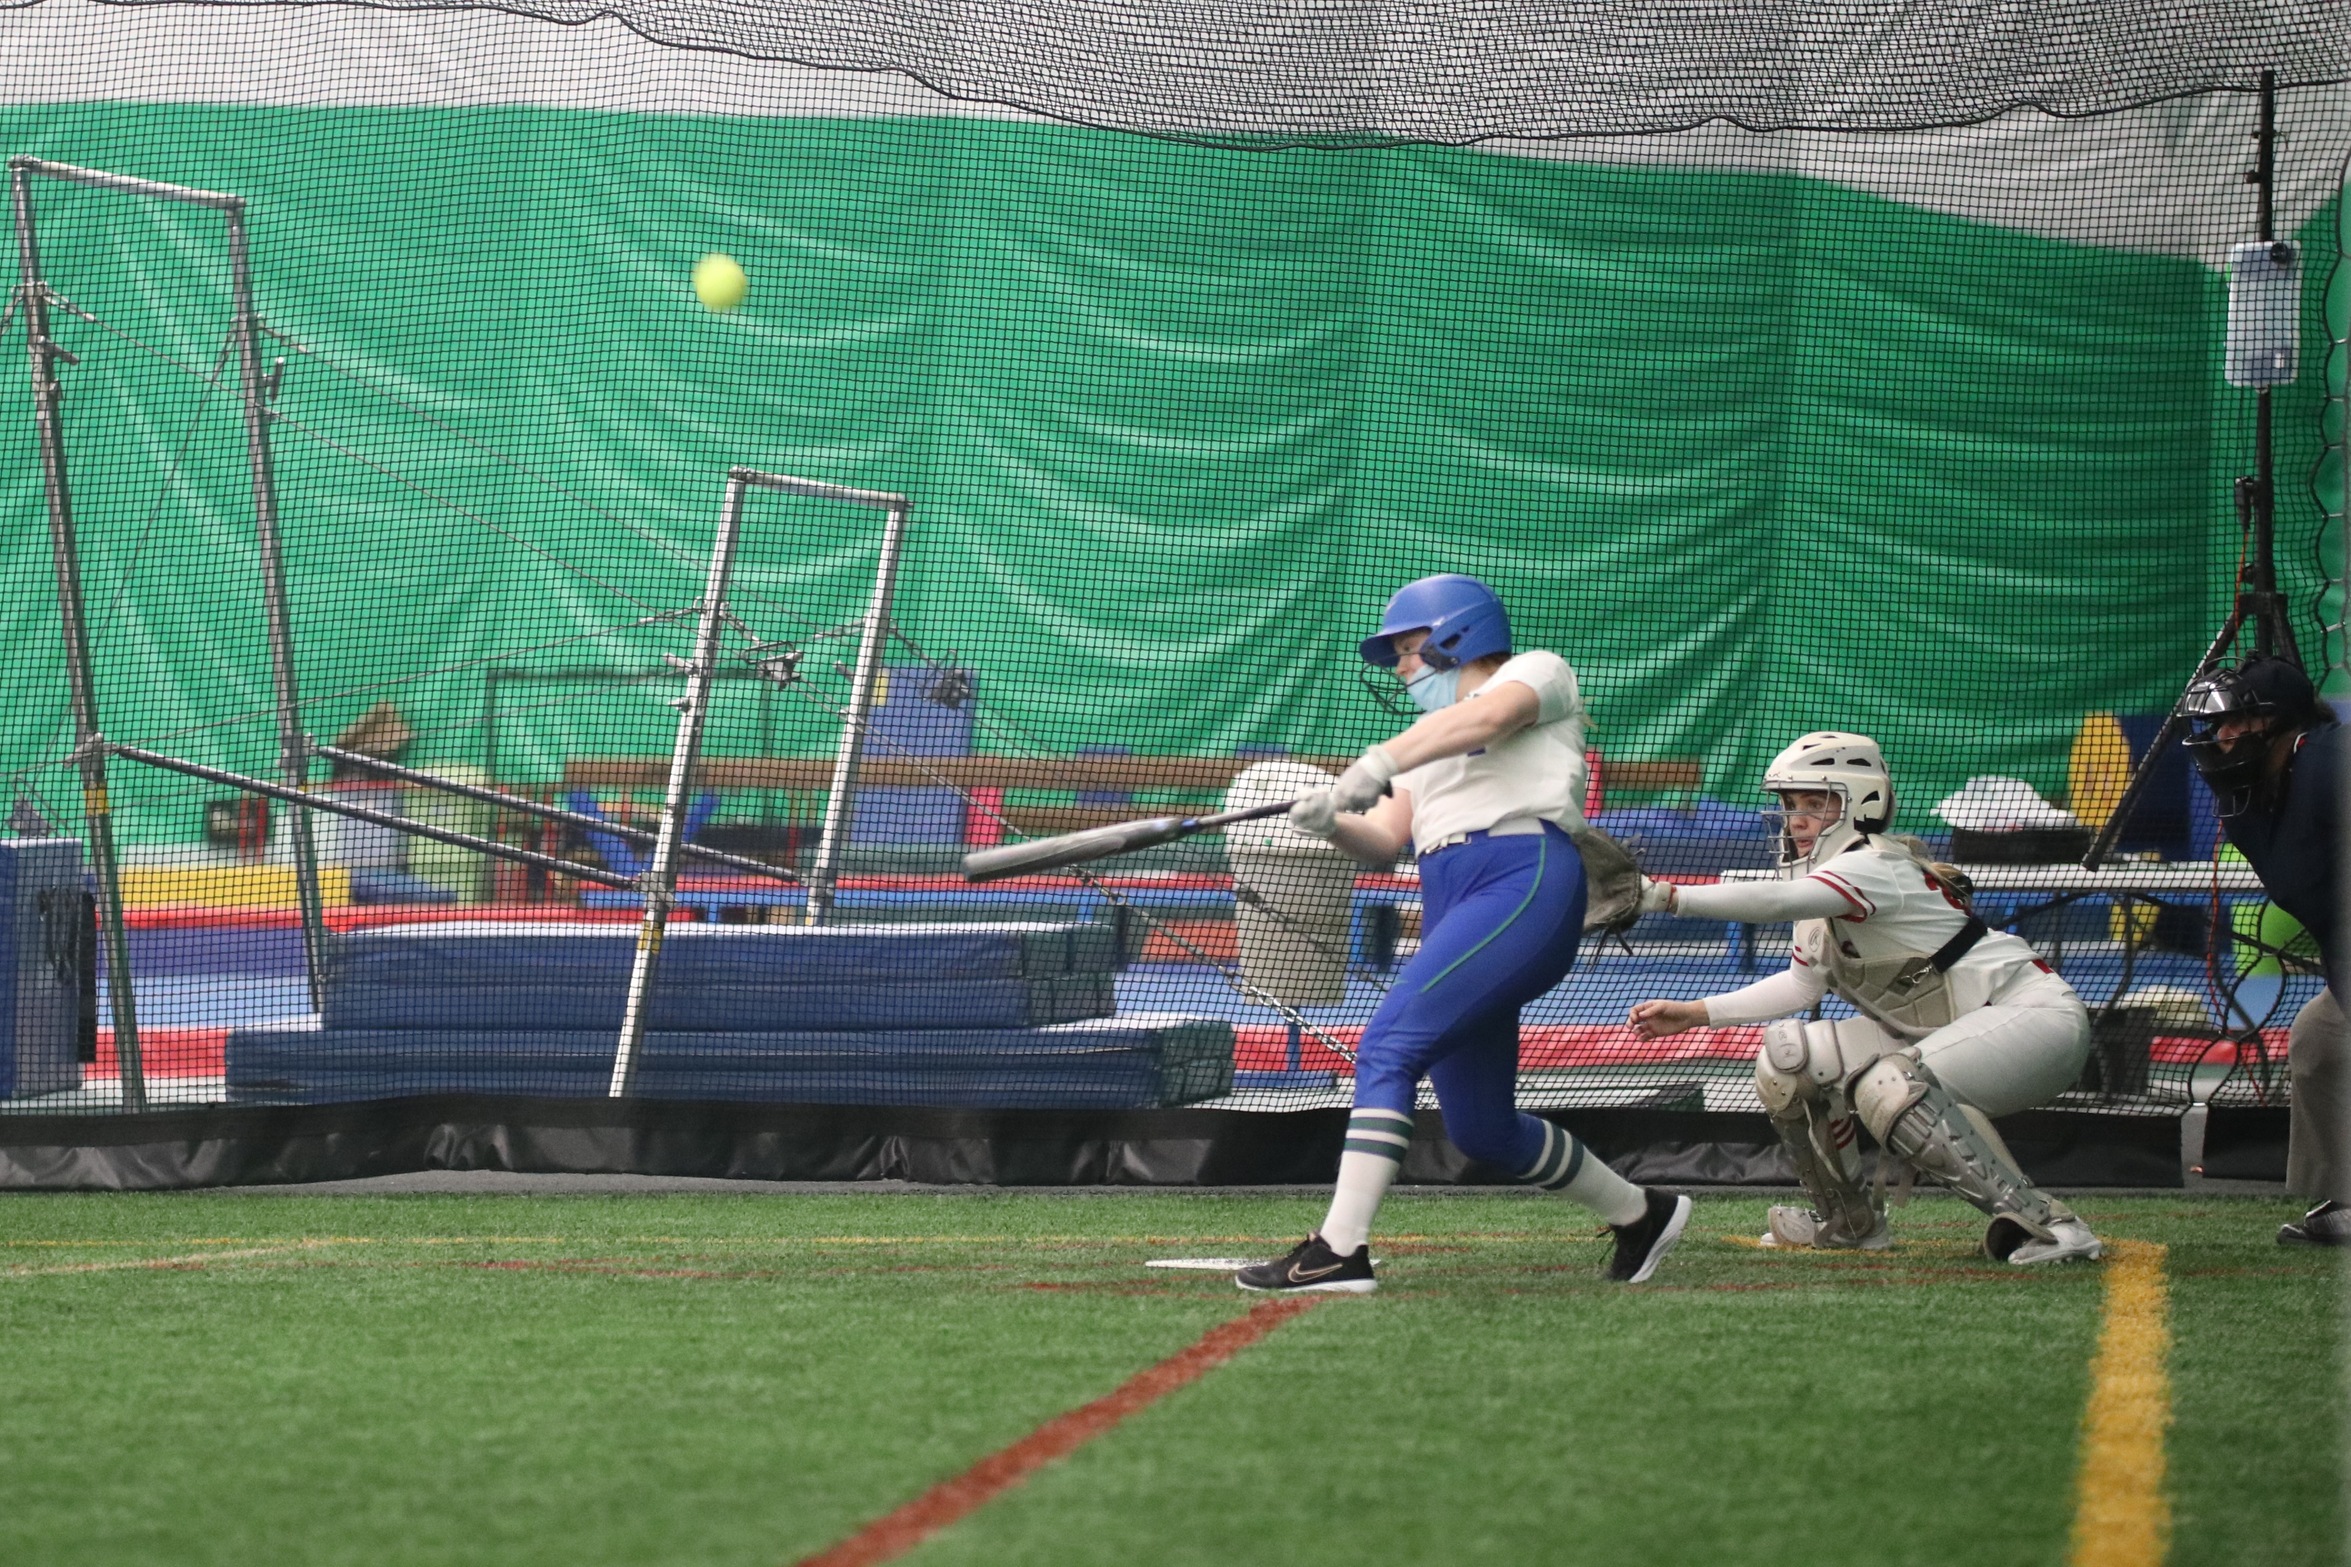 Kristin Goodacre at the plate, having just hit a ball in the air.